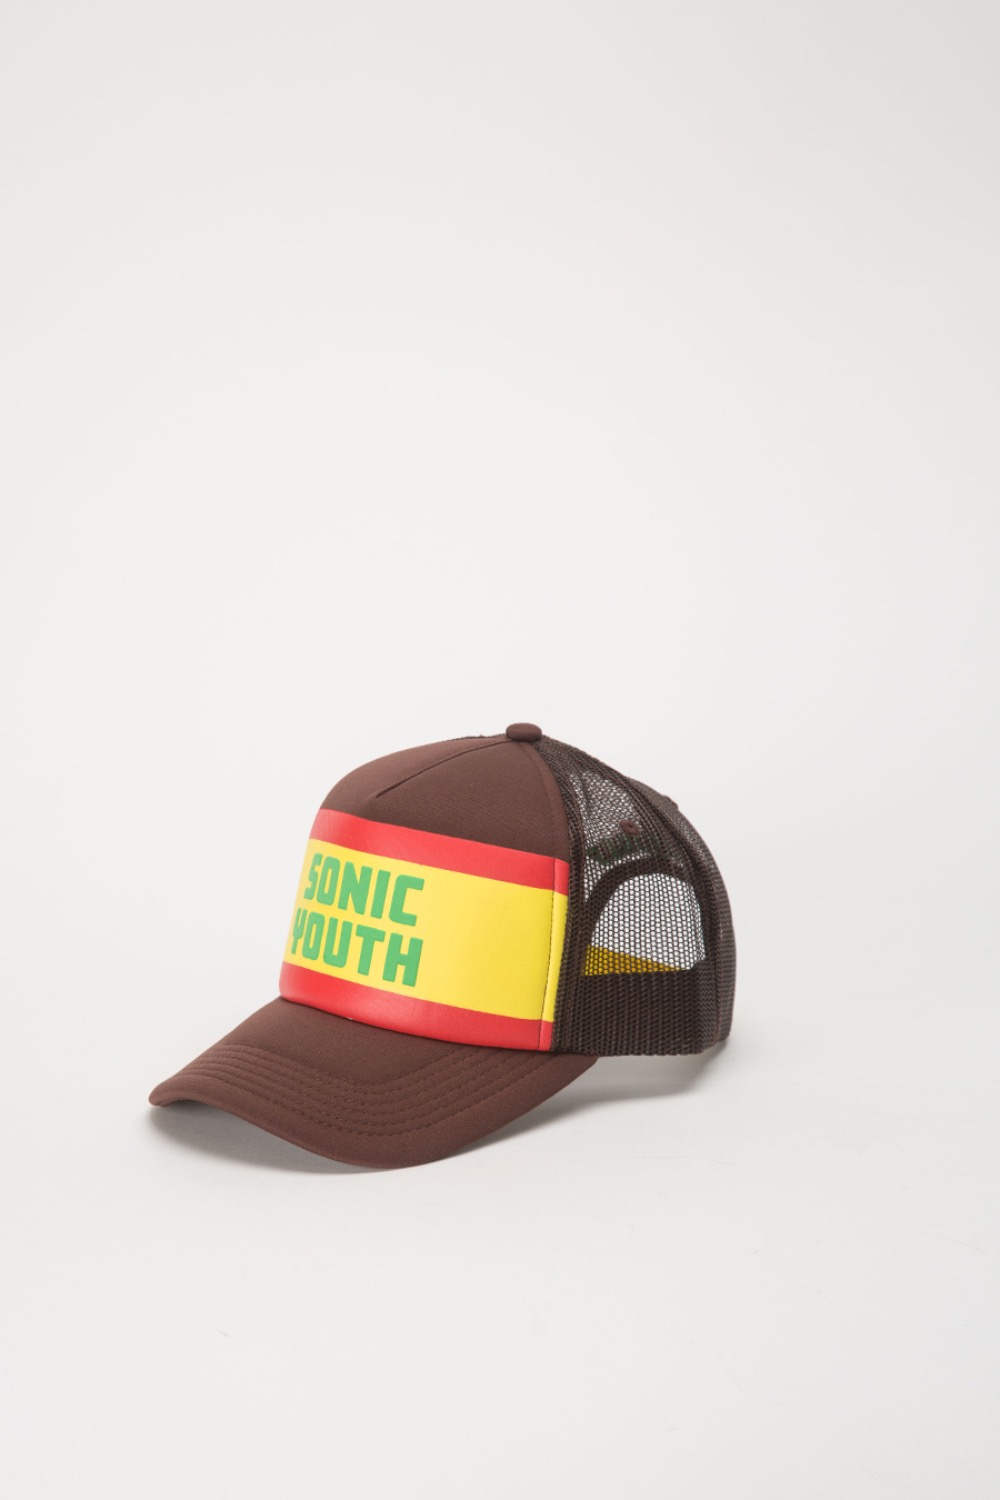 (23FW) SONIC YOUTH TRUCKER BROWN